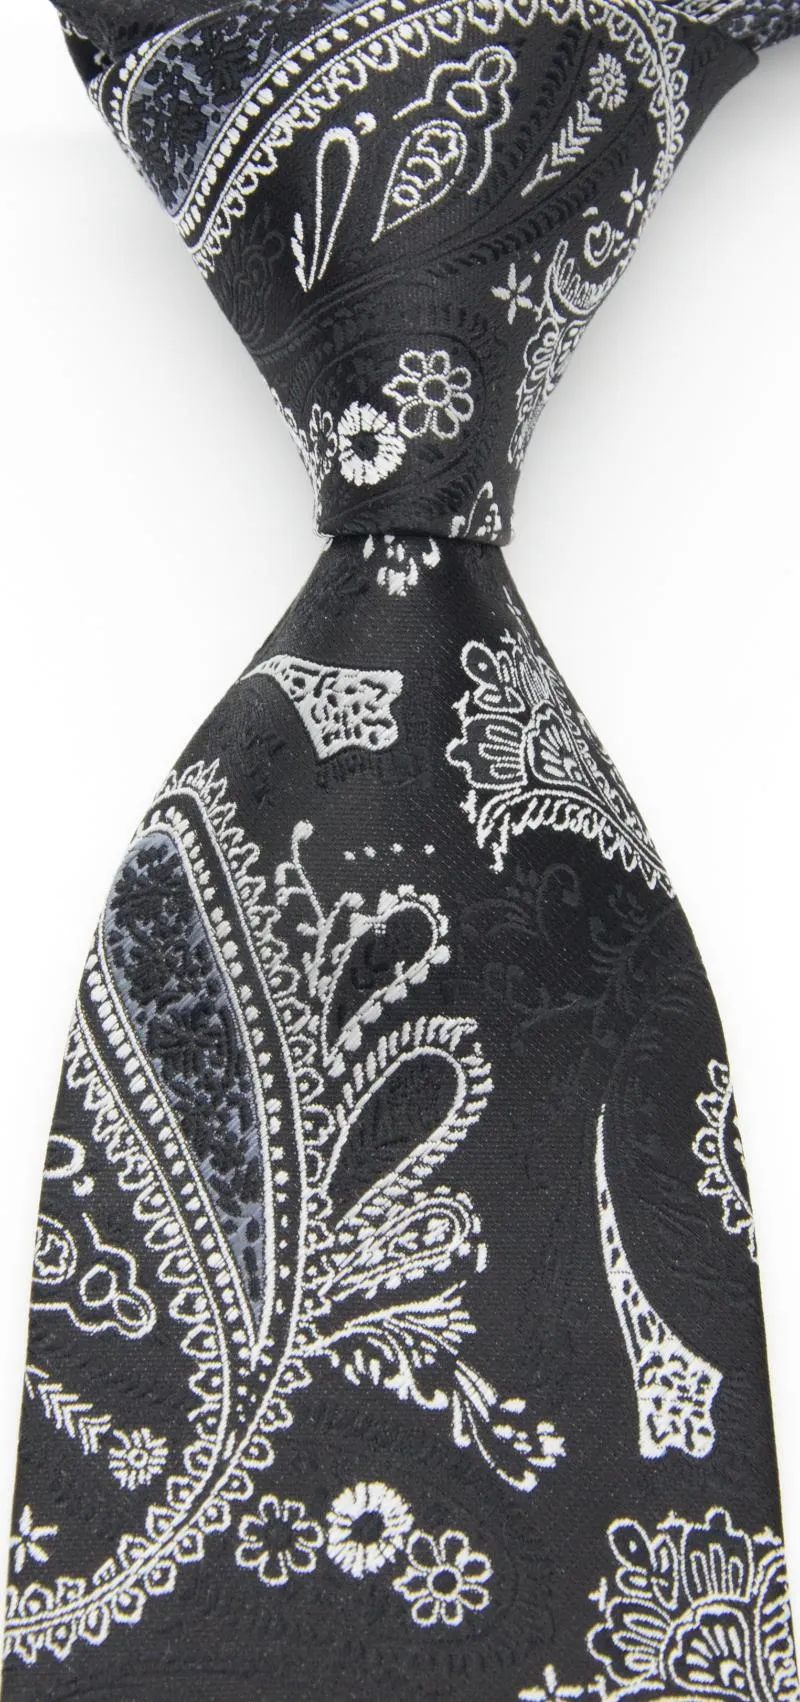 Bow Ties Silk Floral Tie Men's Paisley Print Black White for Men Business Business Luxury Wedding Party NecktiesBow